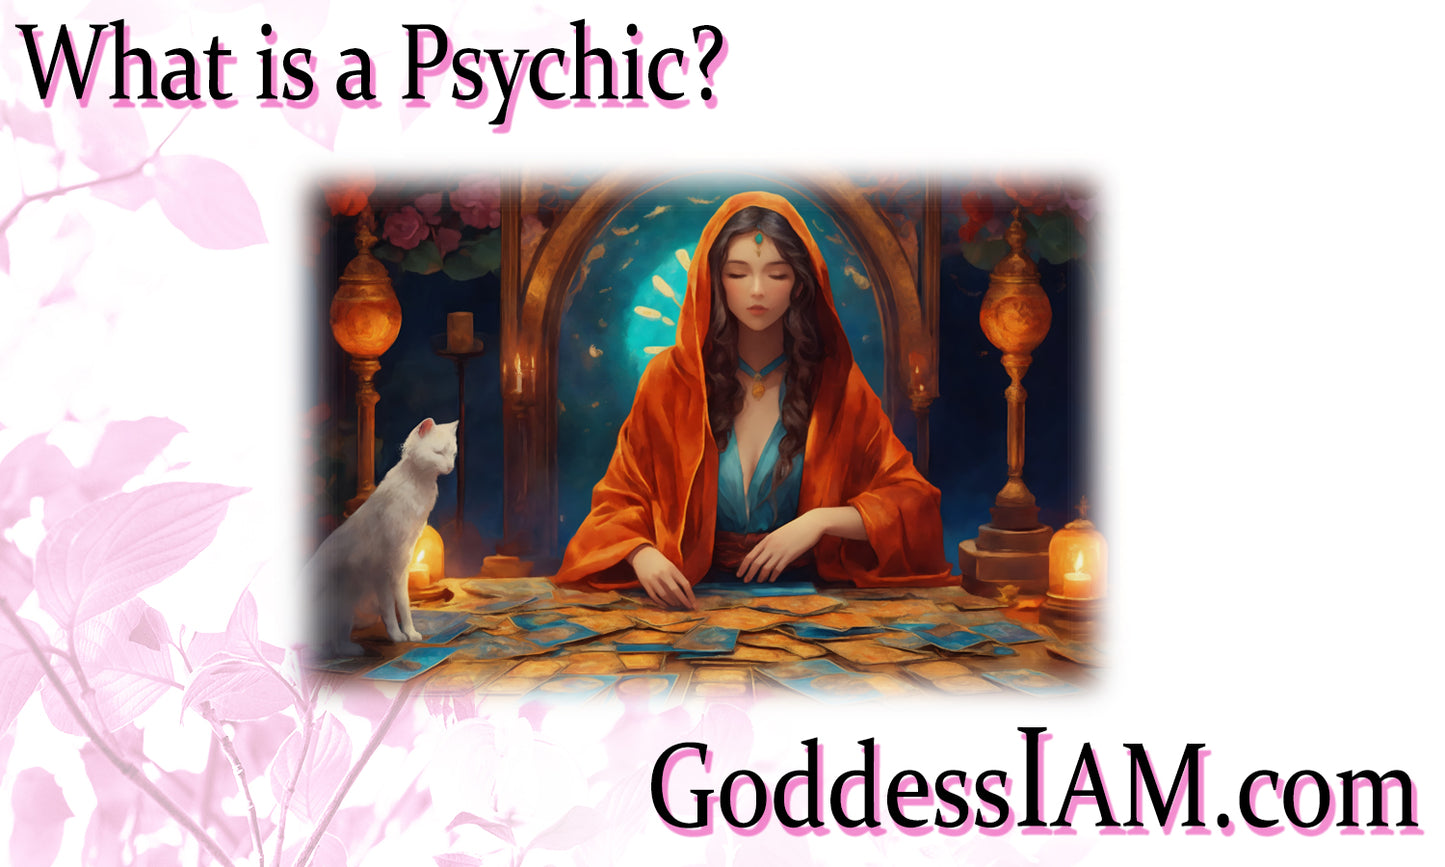 What is a Psychic?